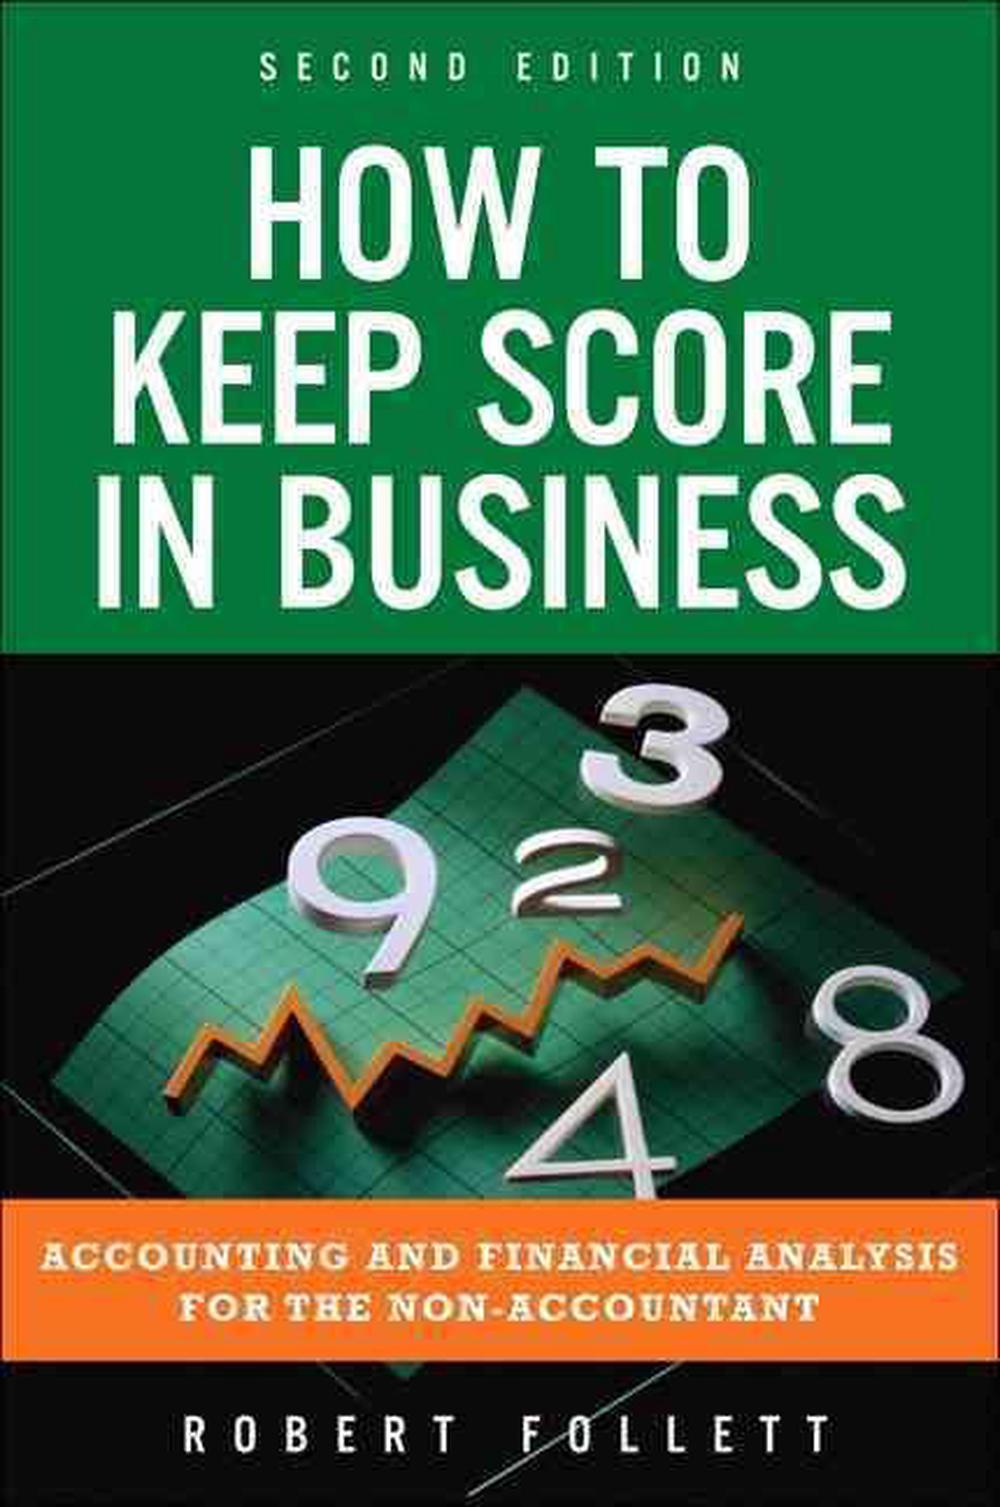 How to Keep Score in Business Accounting and Financial Analysis for the NonAcc 9780132849258